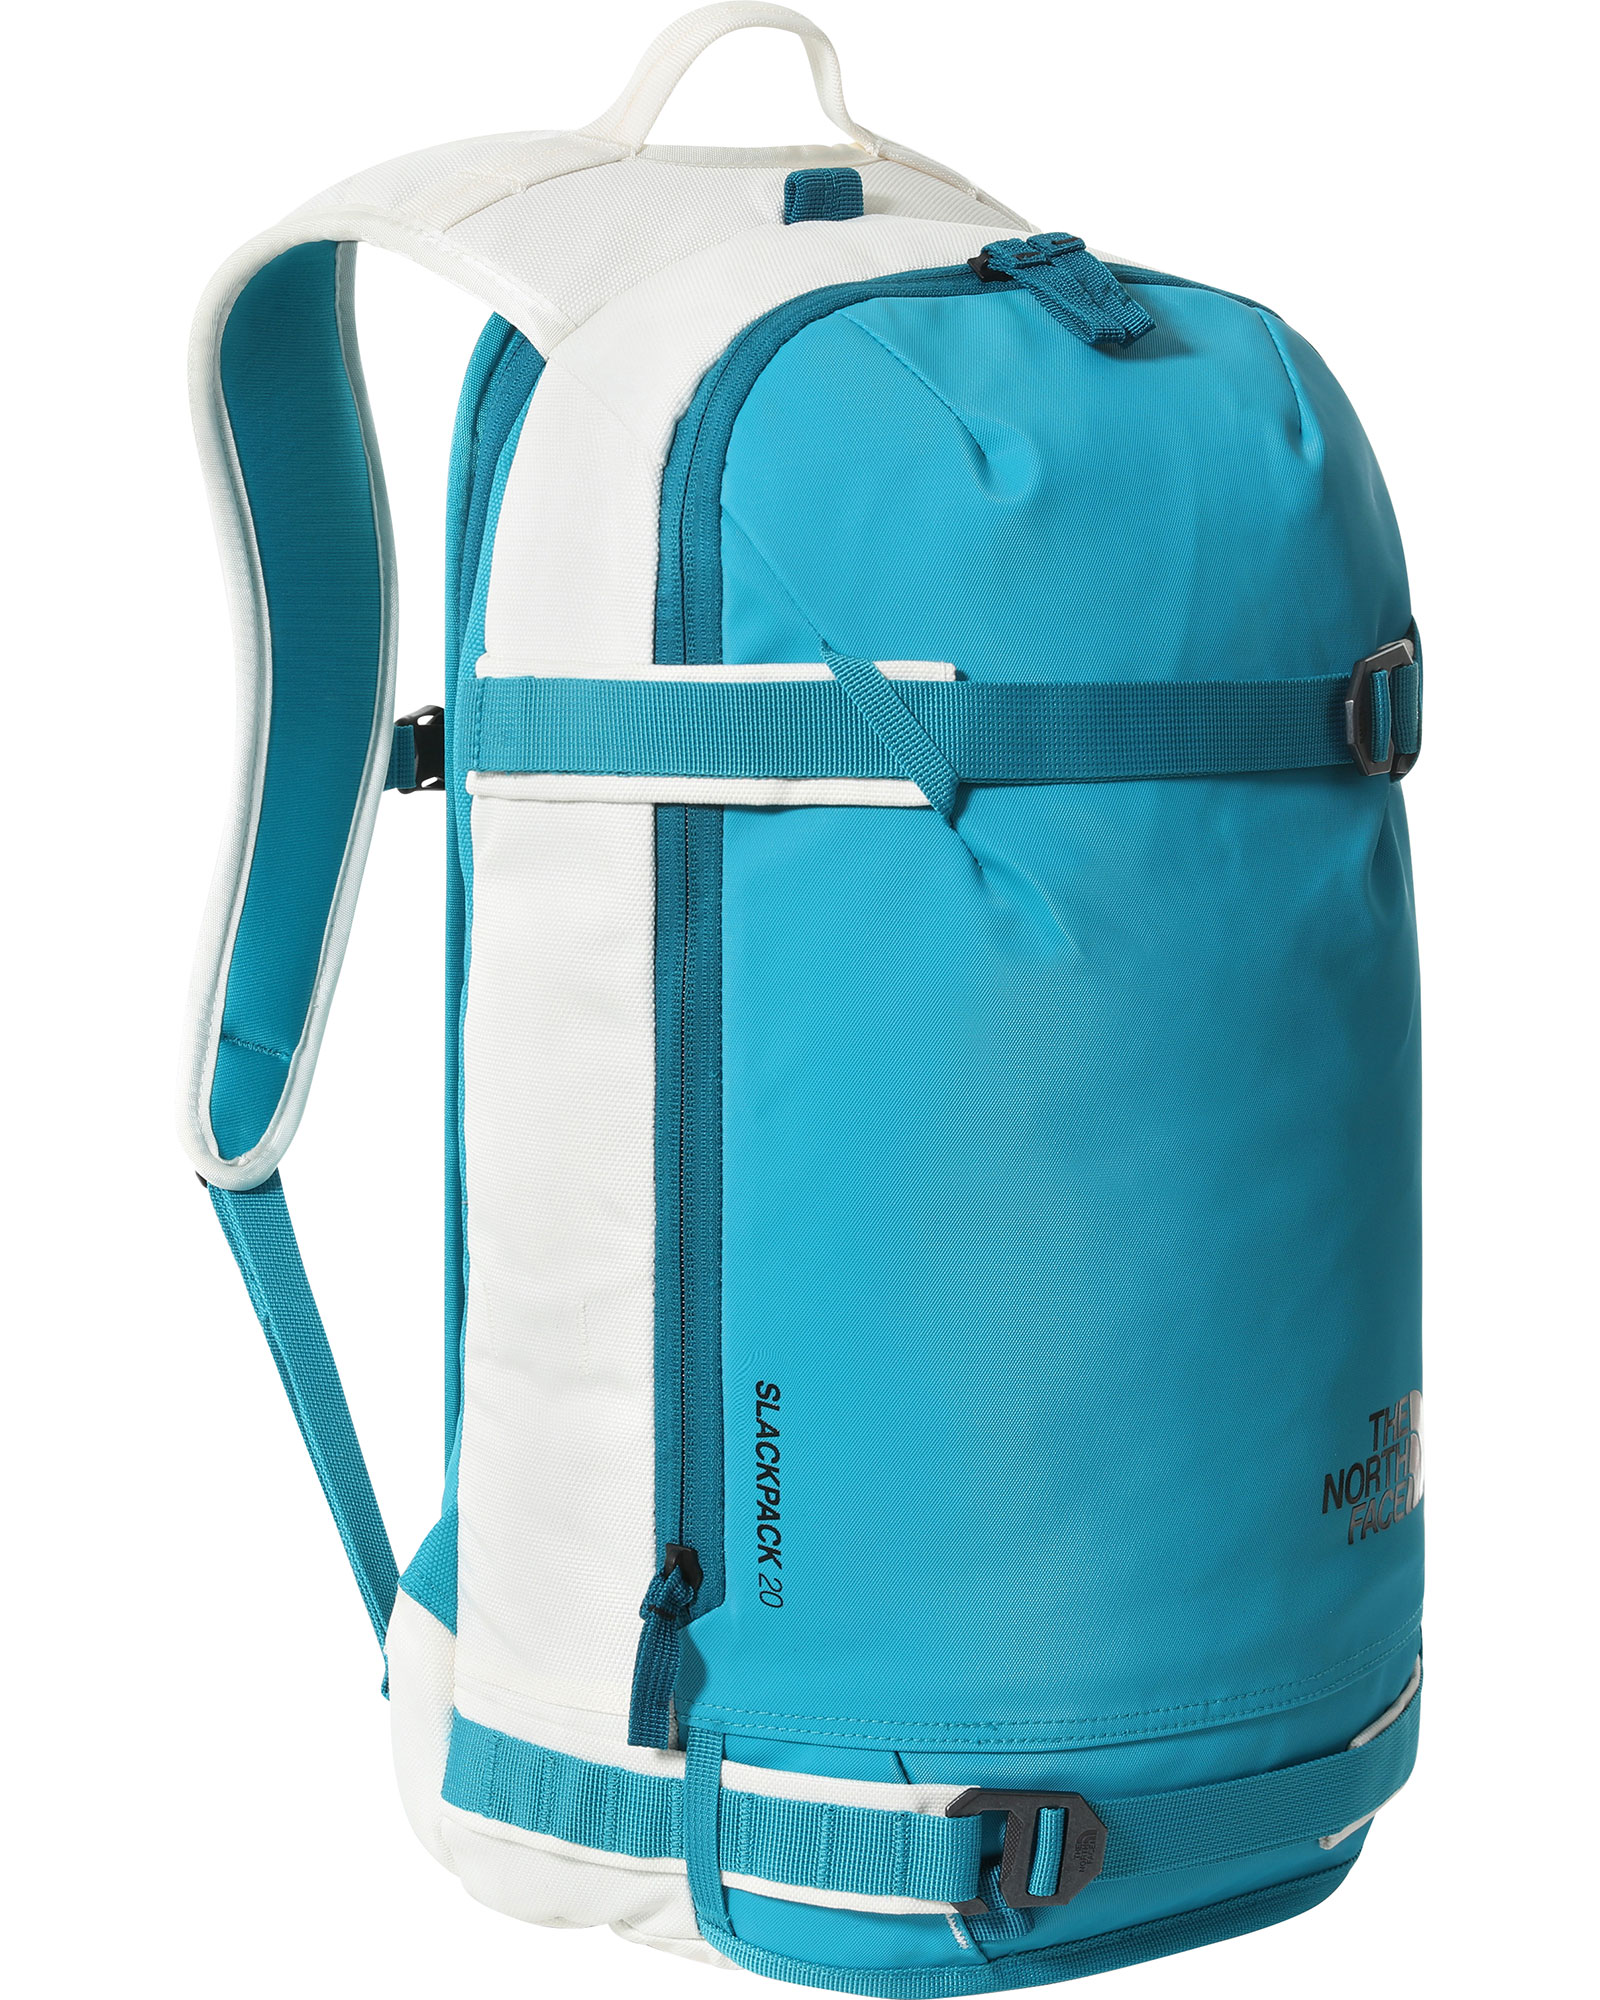 The North Face Women’s Slackpack 2.0 Expedition Backpack - Enamel Blue/Gardenia White